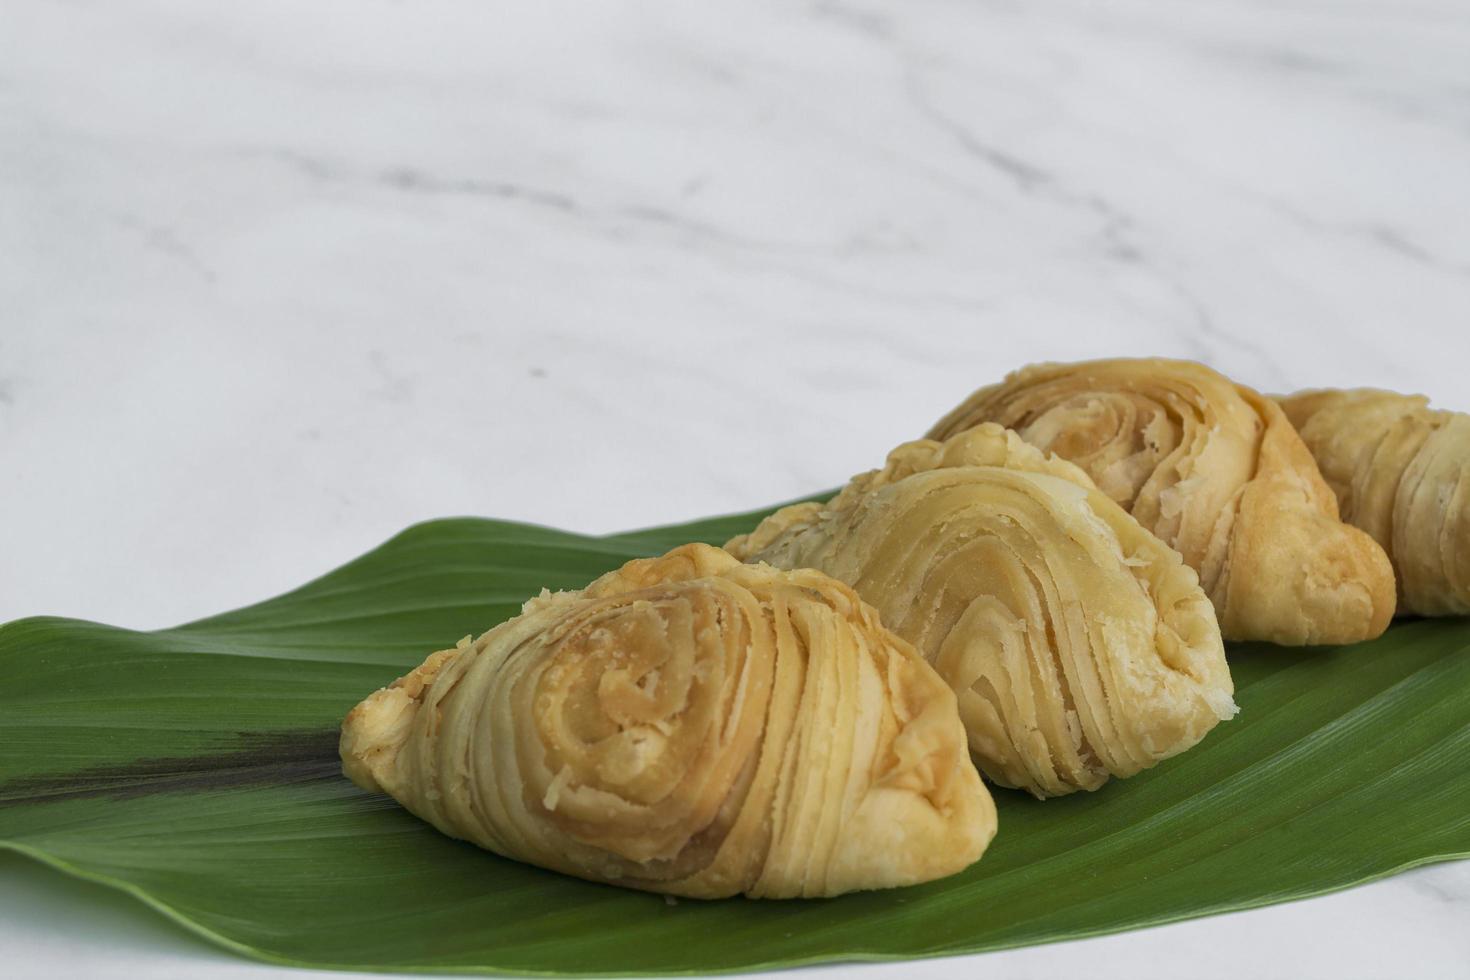 Malaysia popular and traditional snack curry puff filled with potato fillings. photo